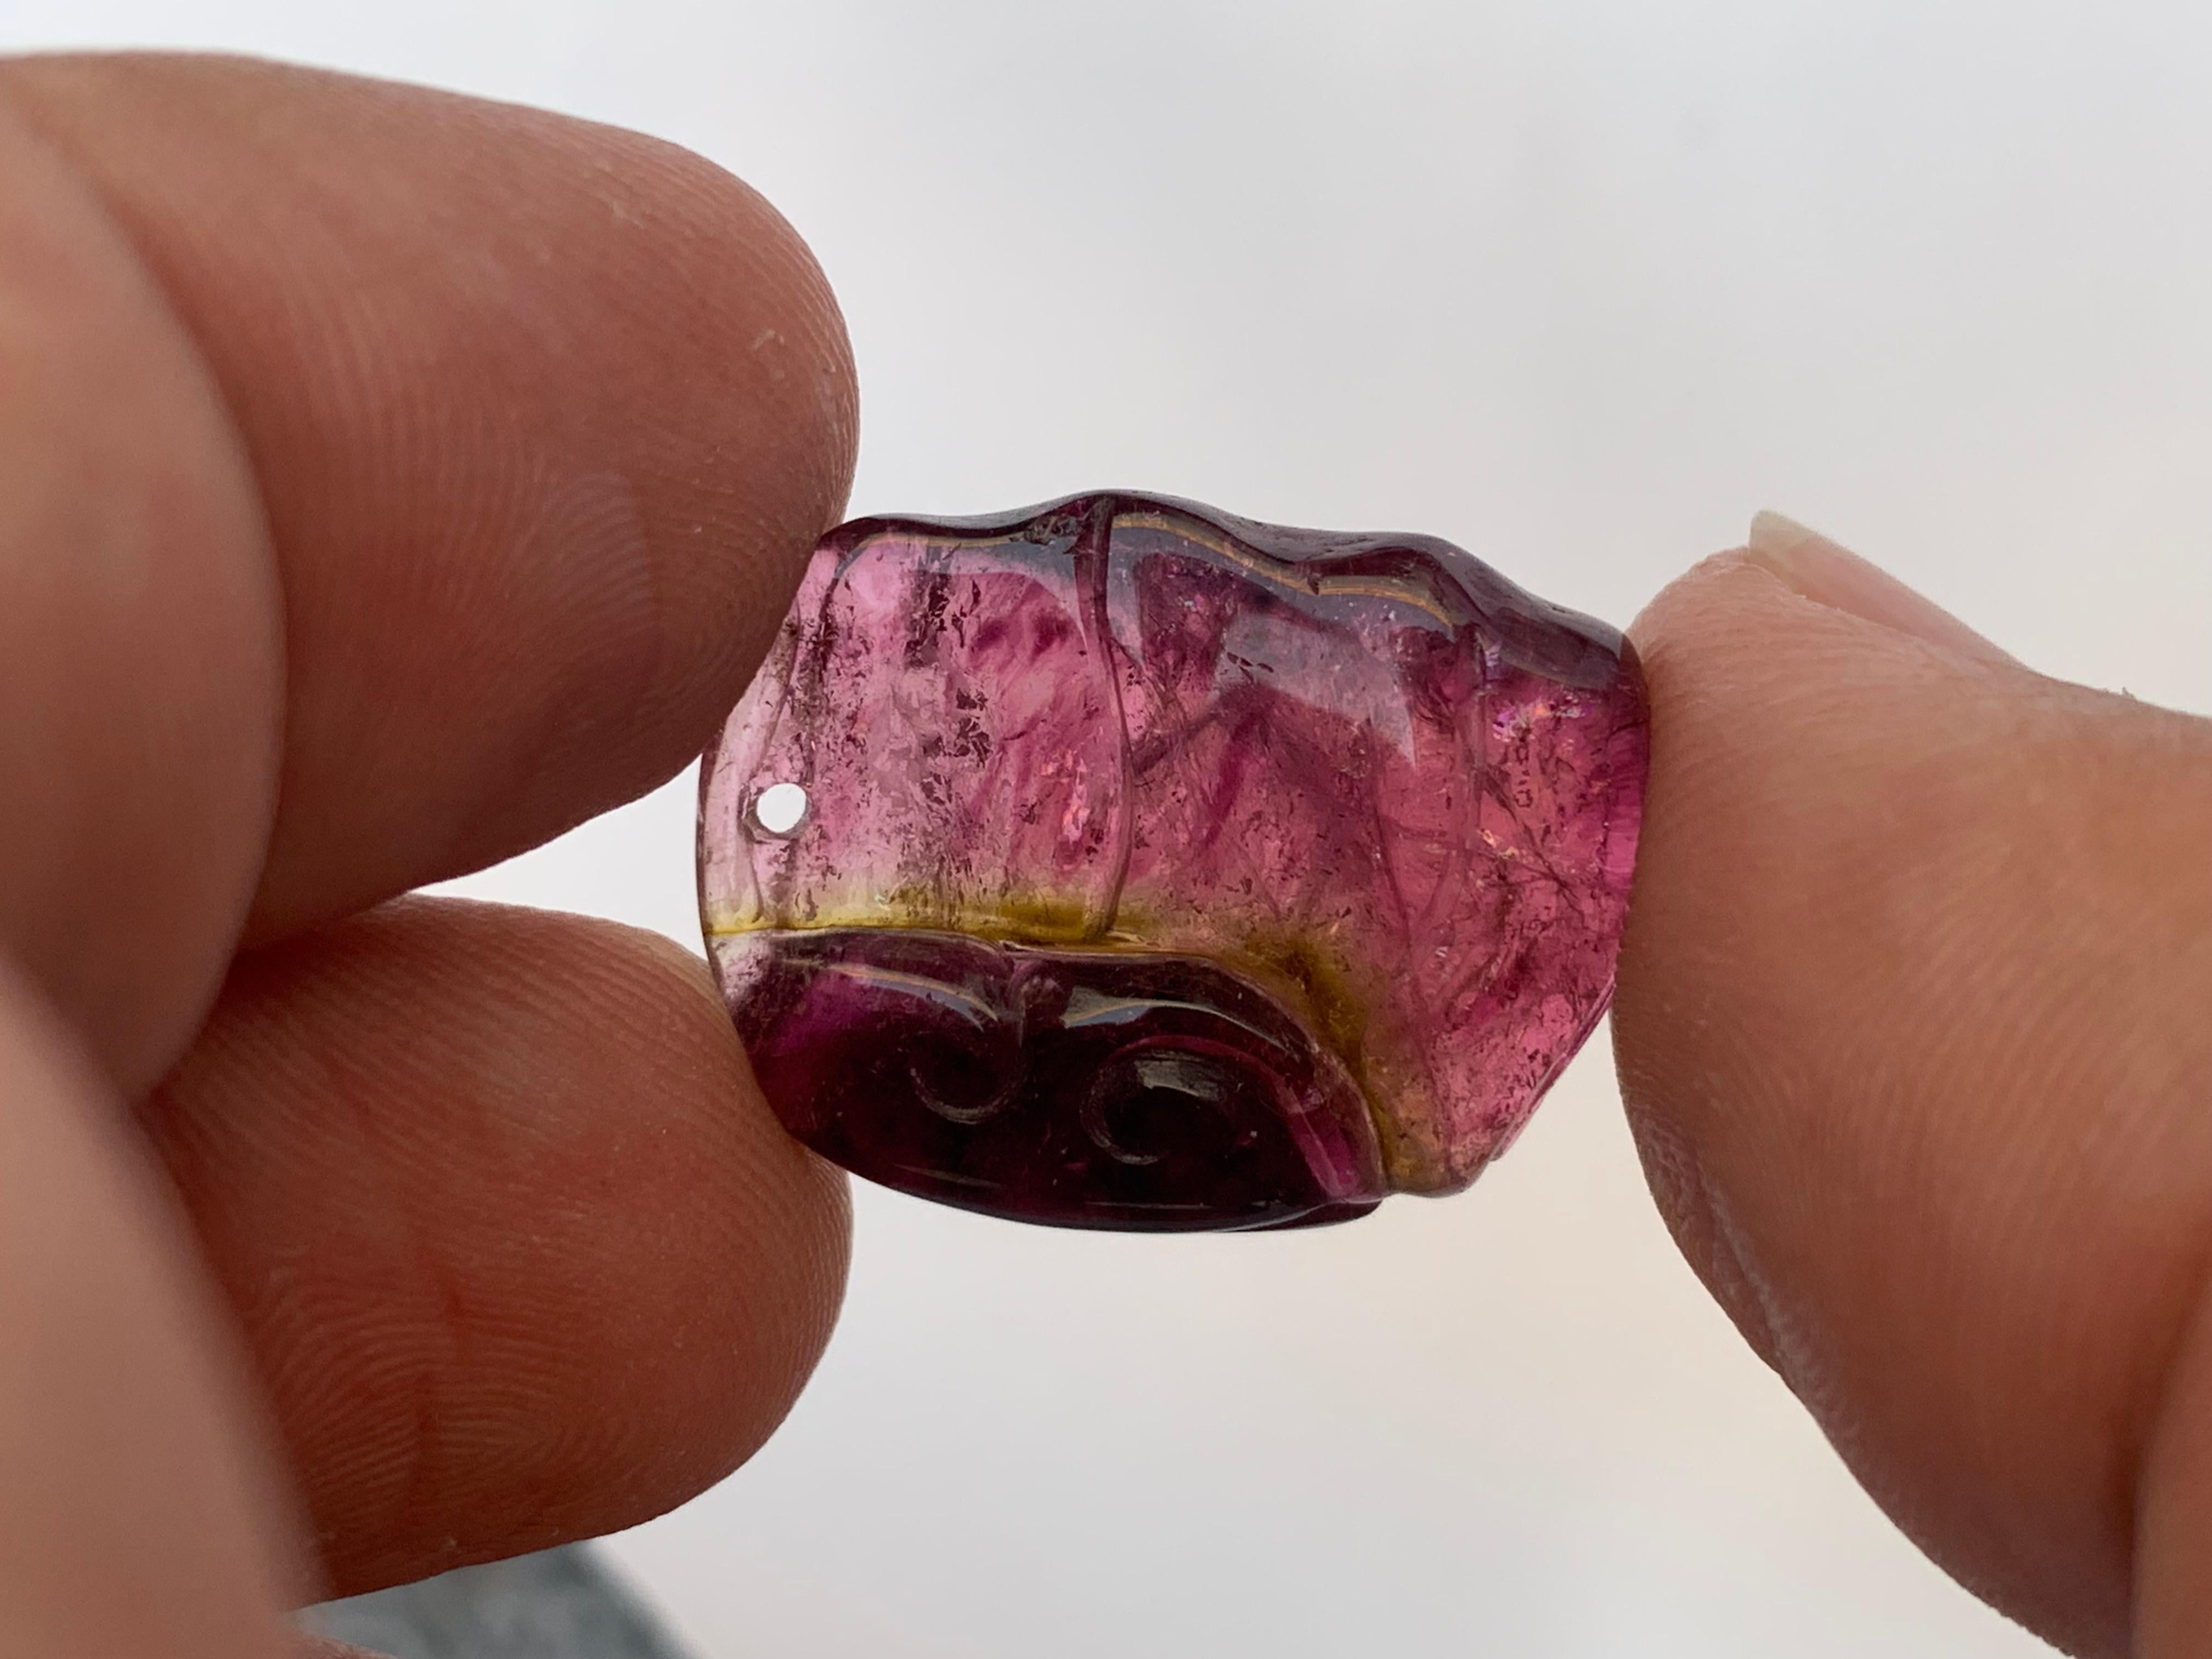 Carved 23.85 Carat Stunning Loose Tri Color Tourmaline Drilled Carving from Afghanistan